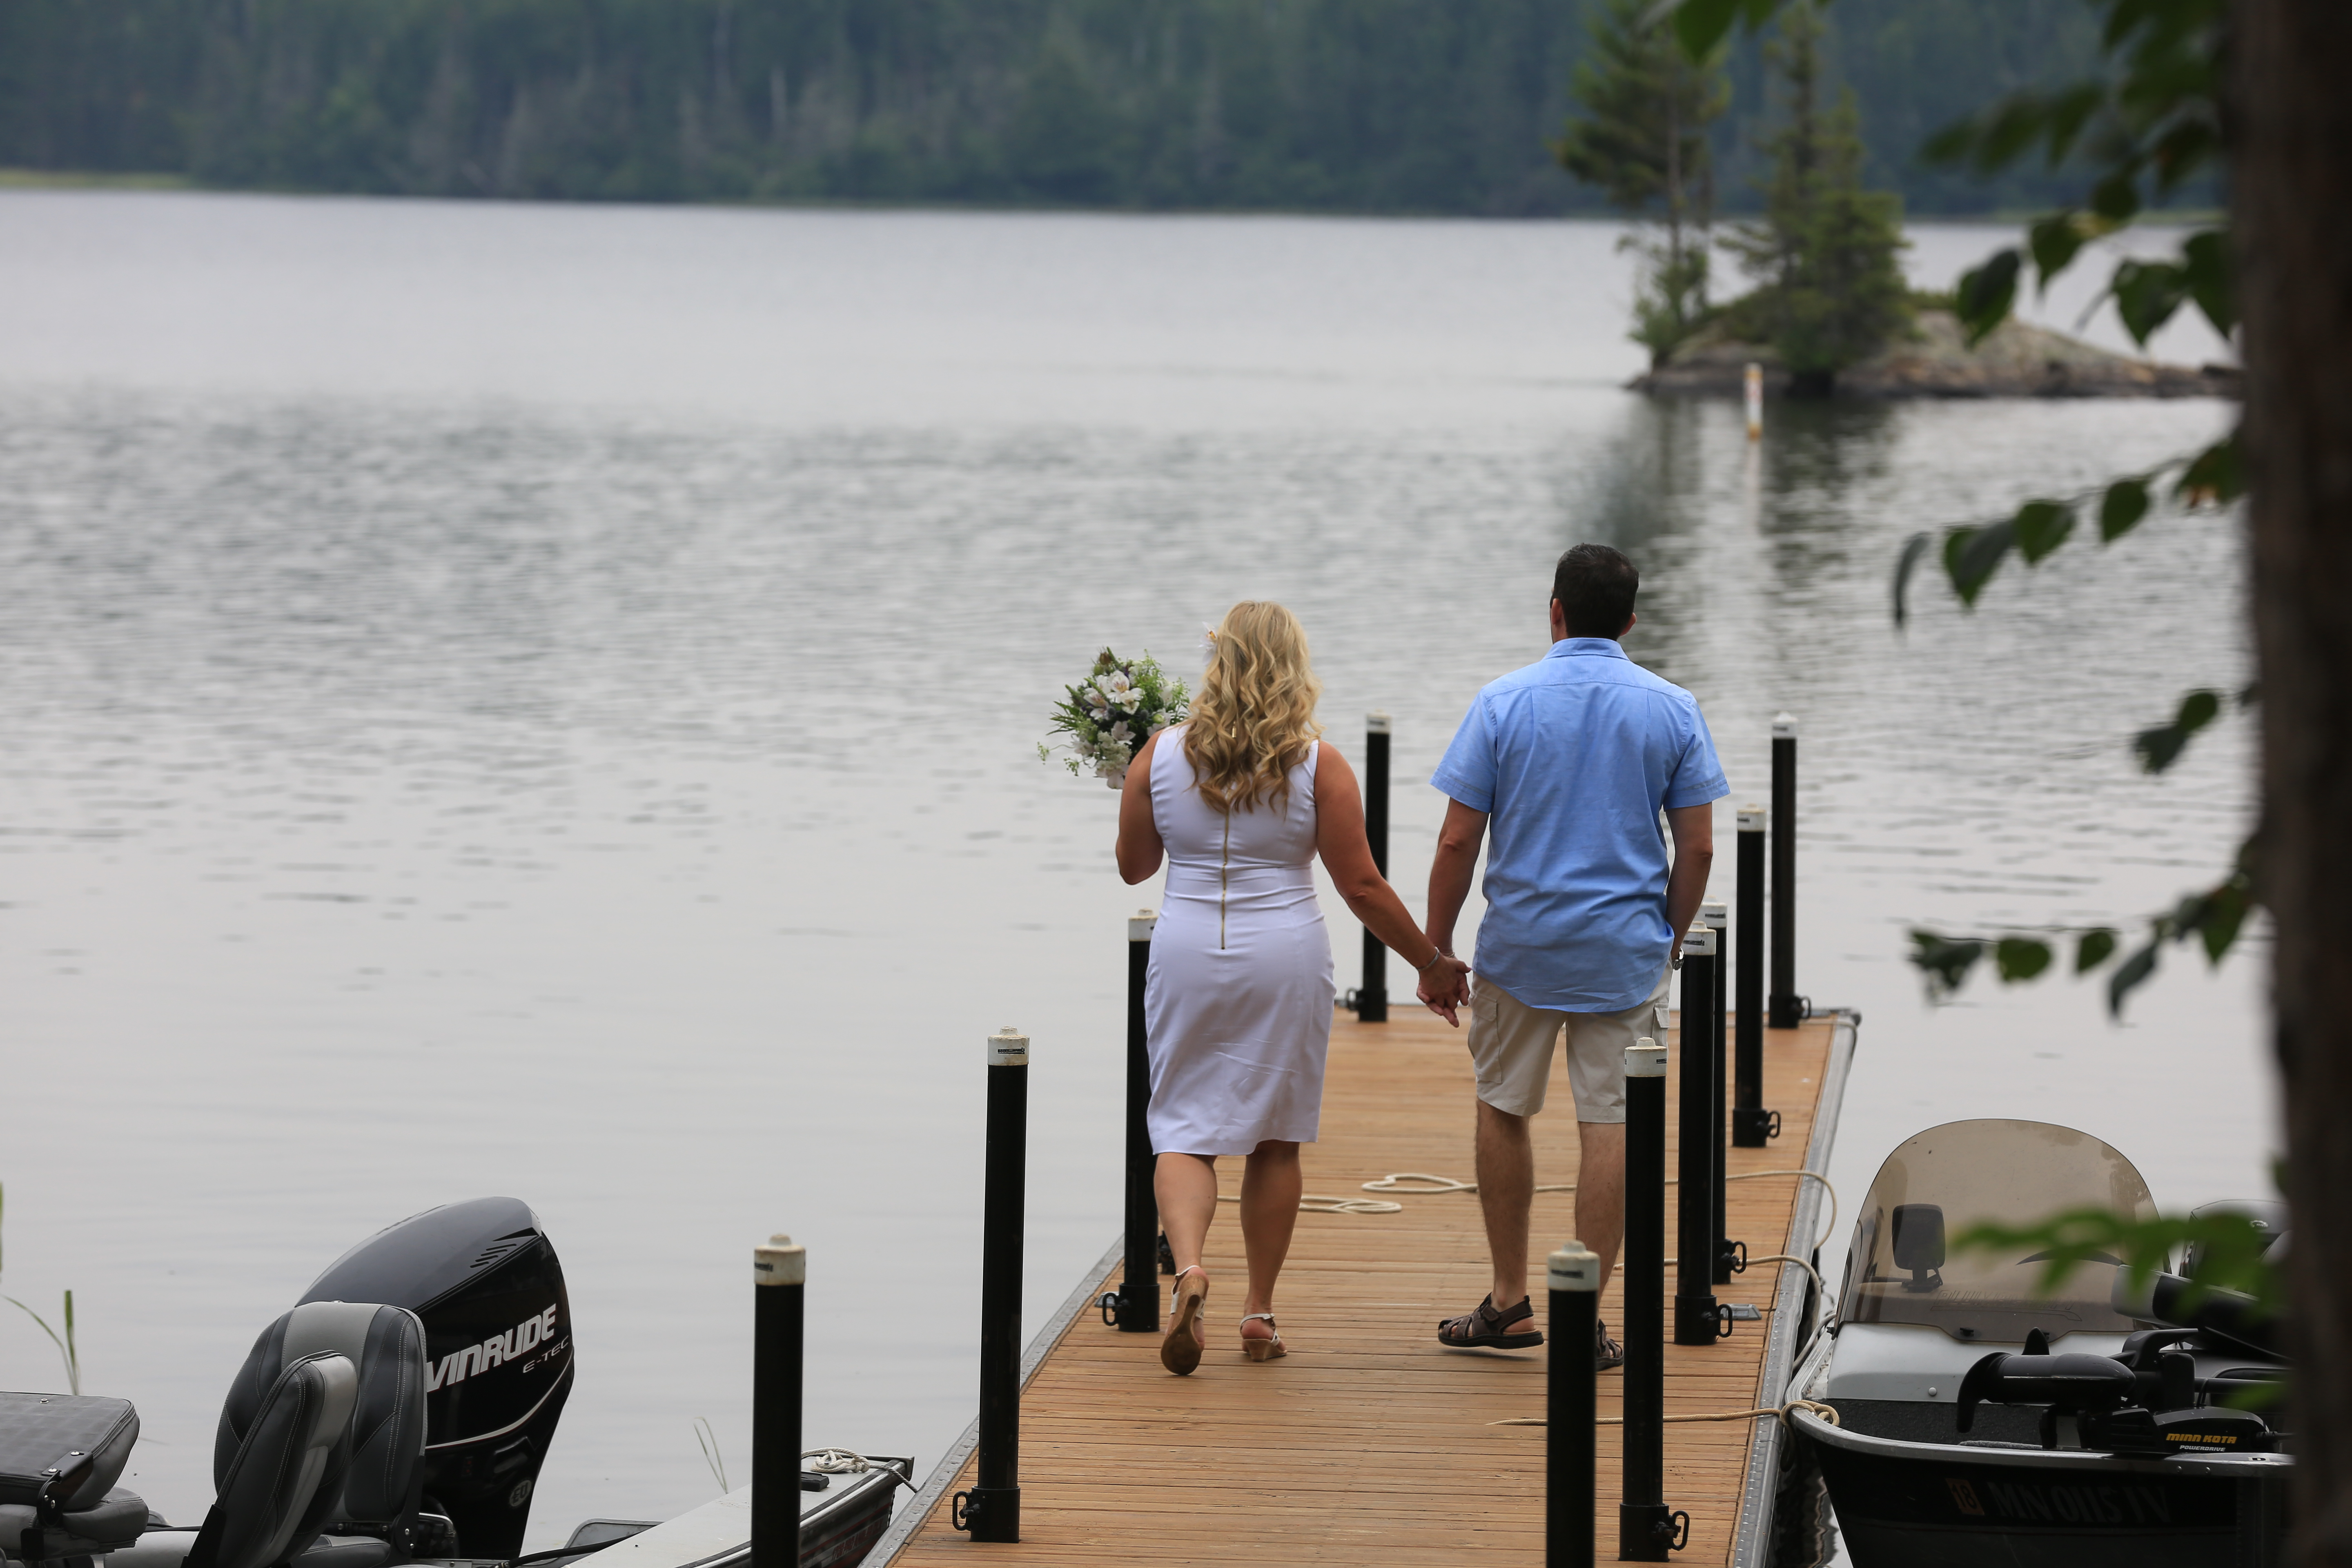 Specials Packages-Fishing Packages, Military Discounts, Honeymoons, Family Reunion-River Point Resort-Birch Lake-Ely MN